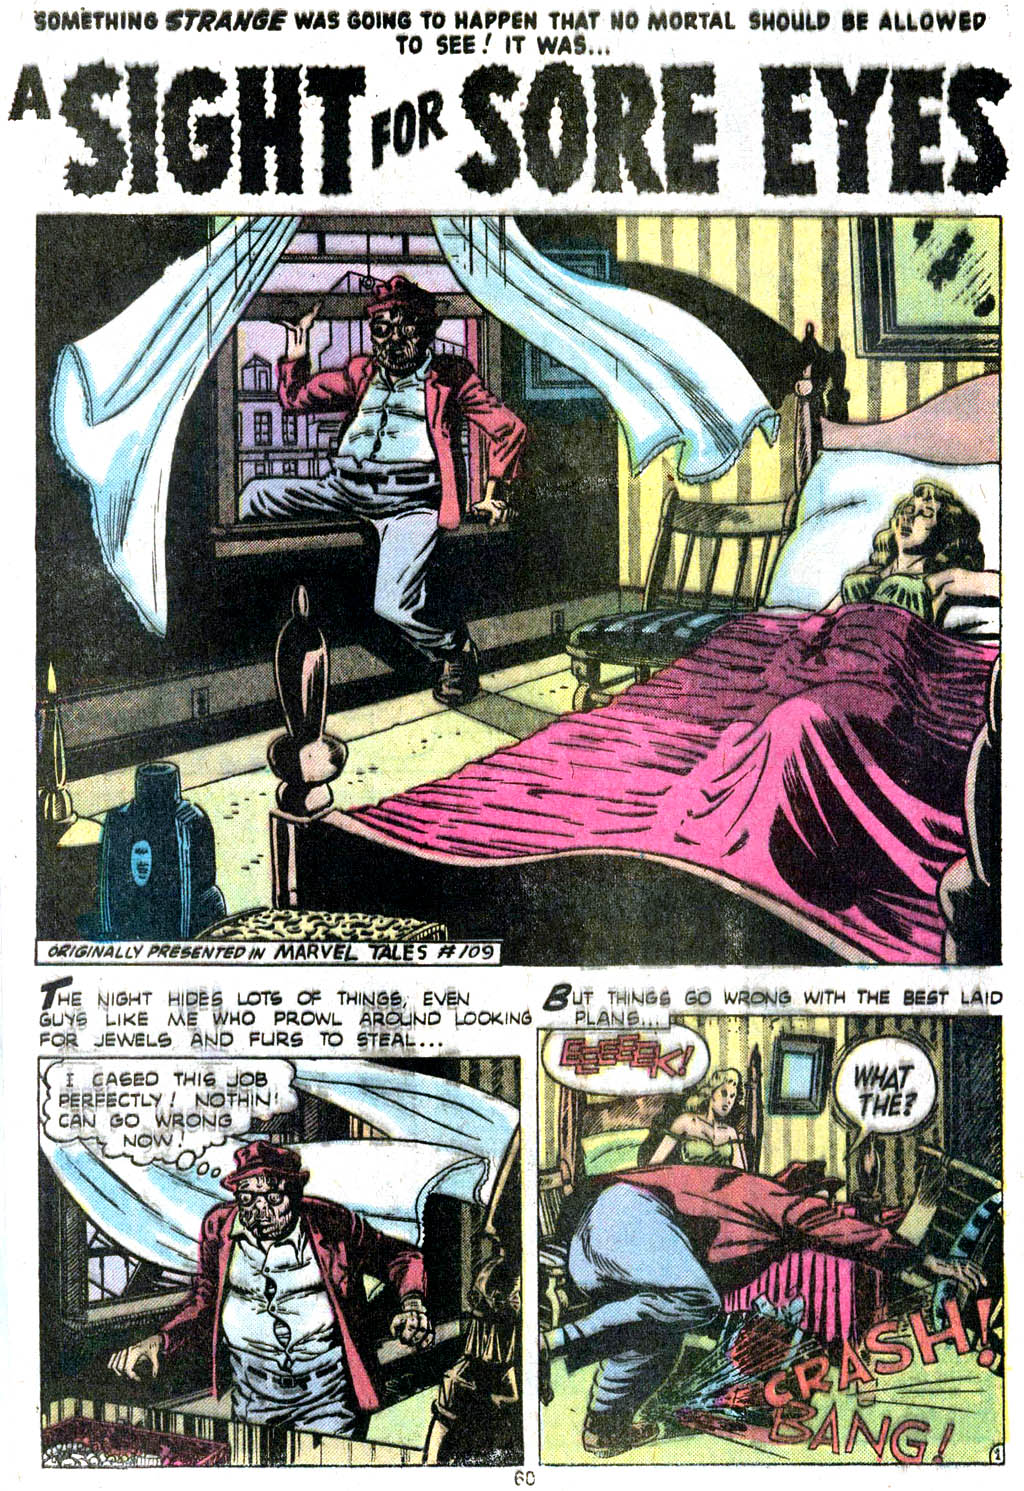 Marvel Tales (1949) 109 Page 1